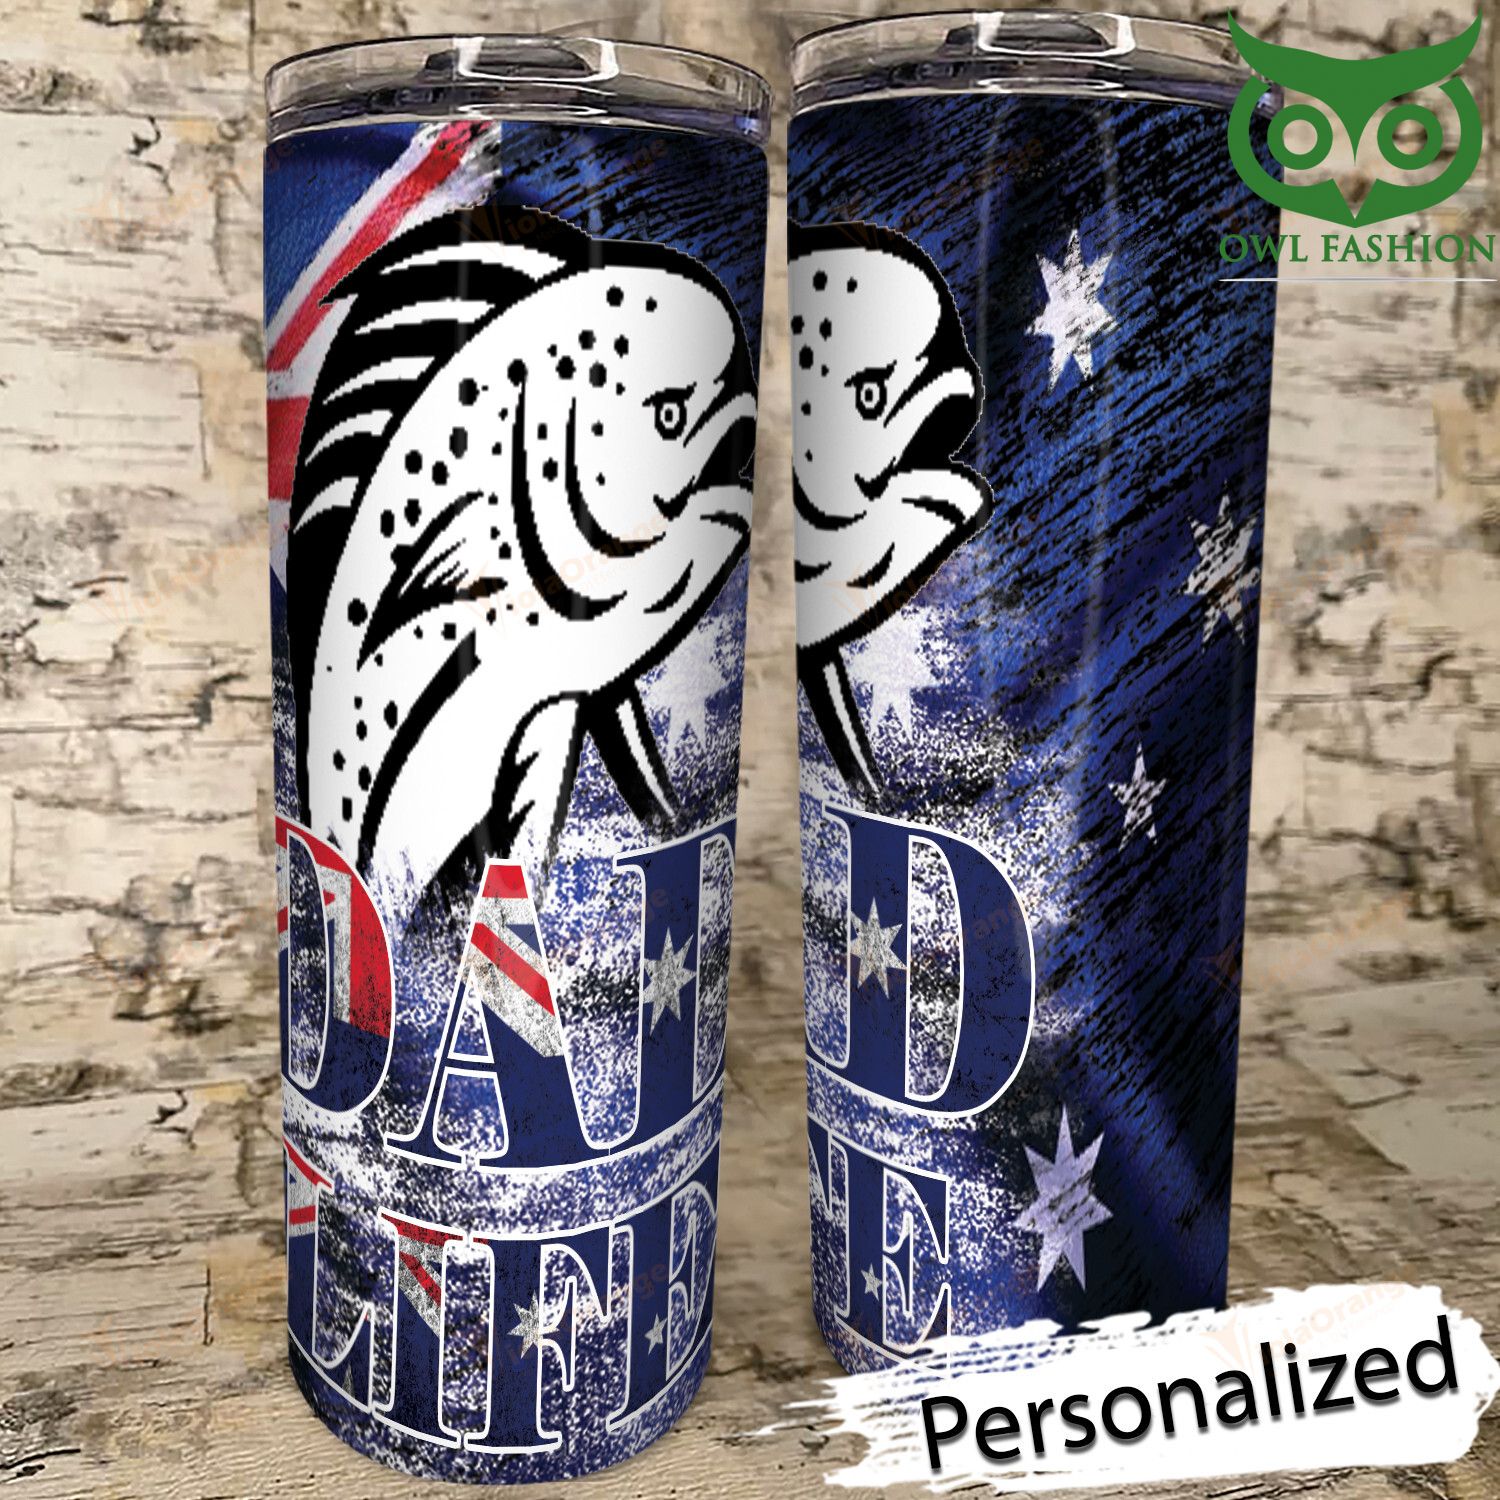 Aus Fishing customized skinny tumbler cup special edition